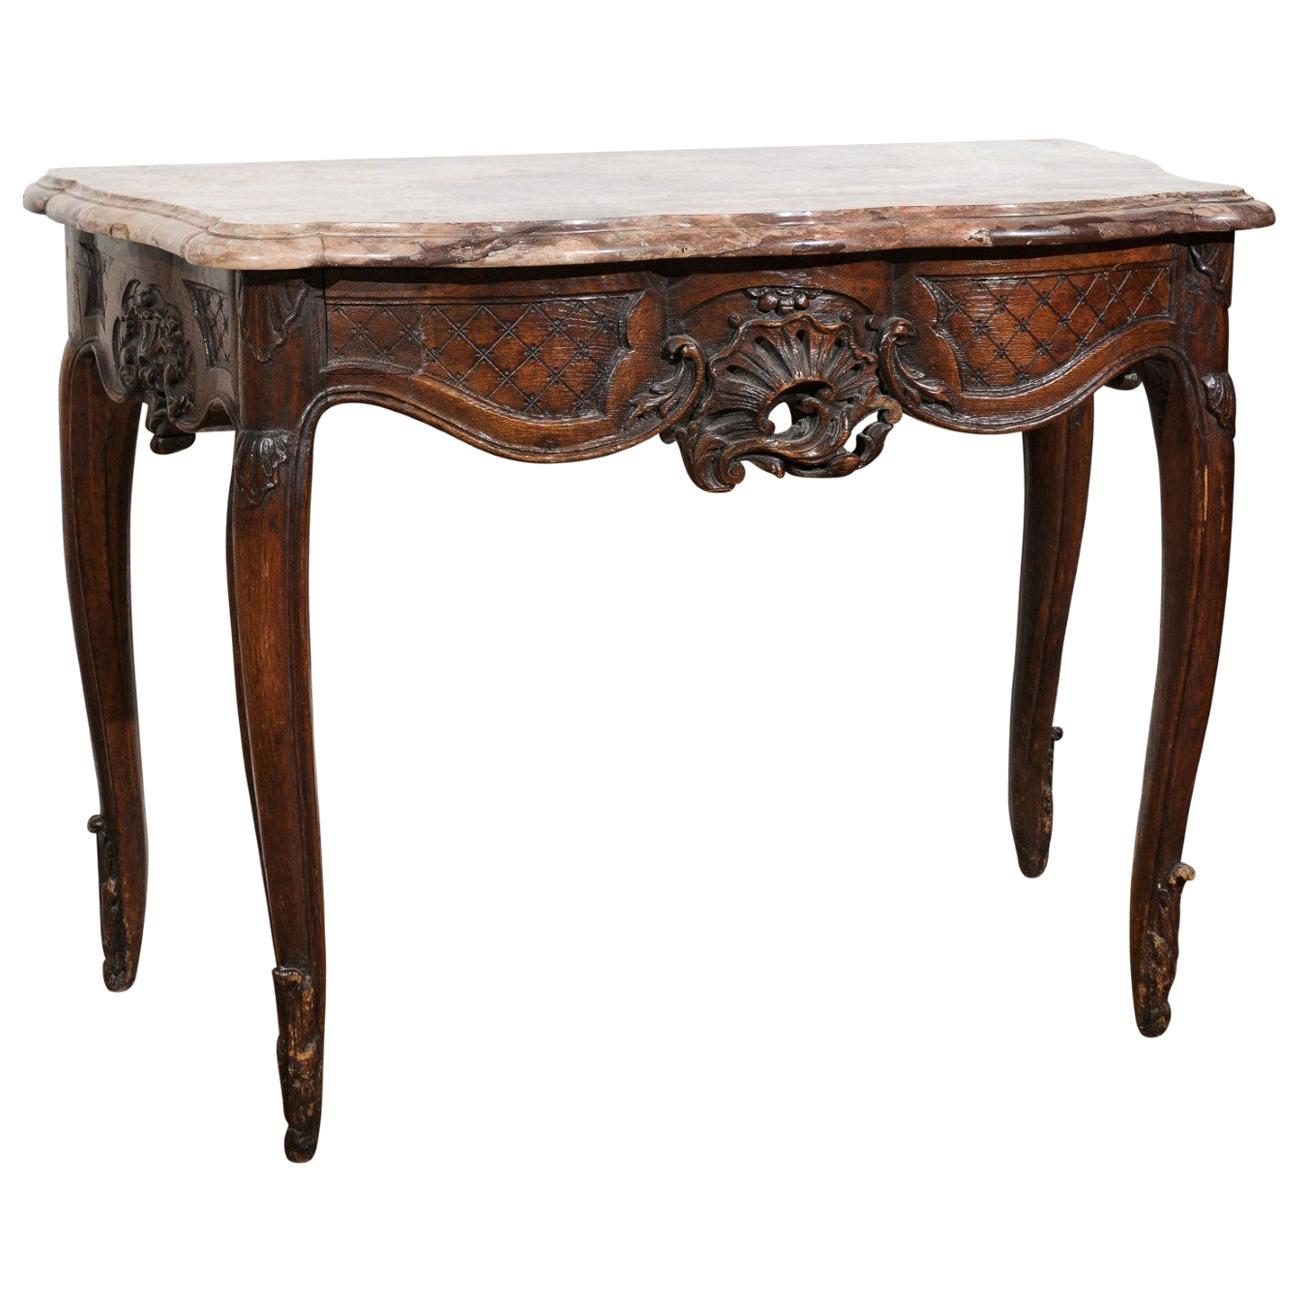 French 1720s Régence Period Walnut Console Table with Original Marble Top